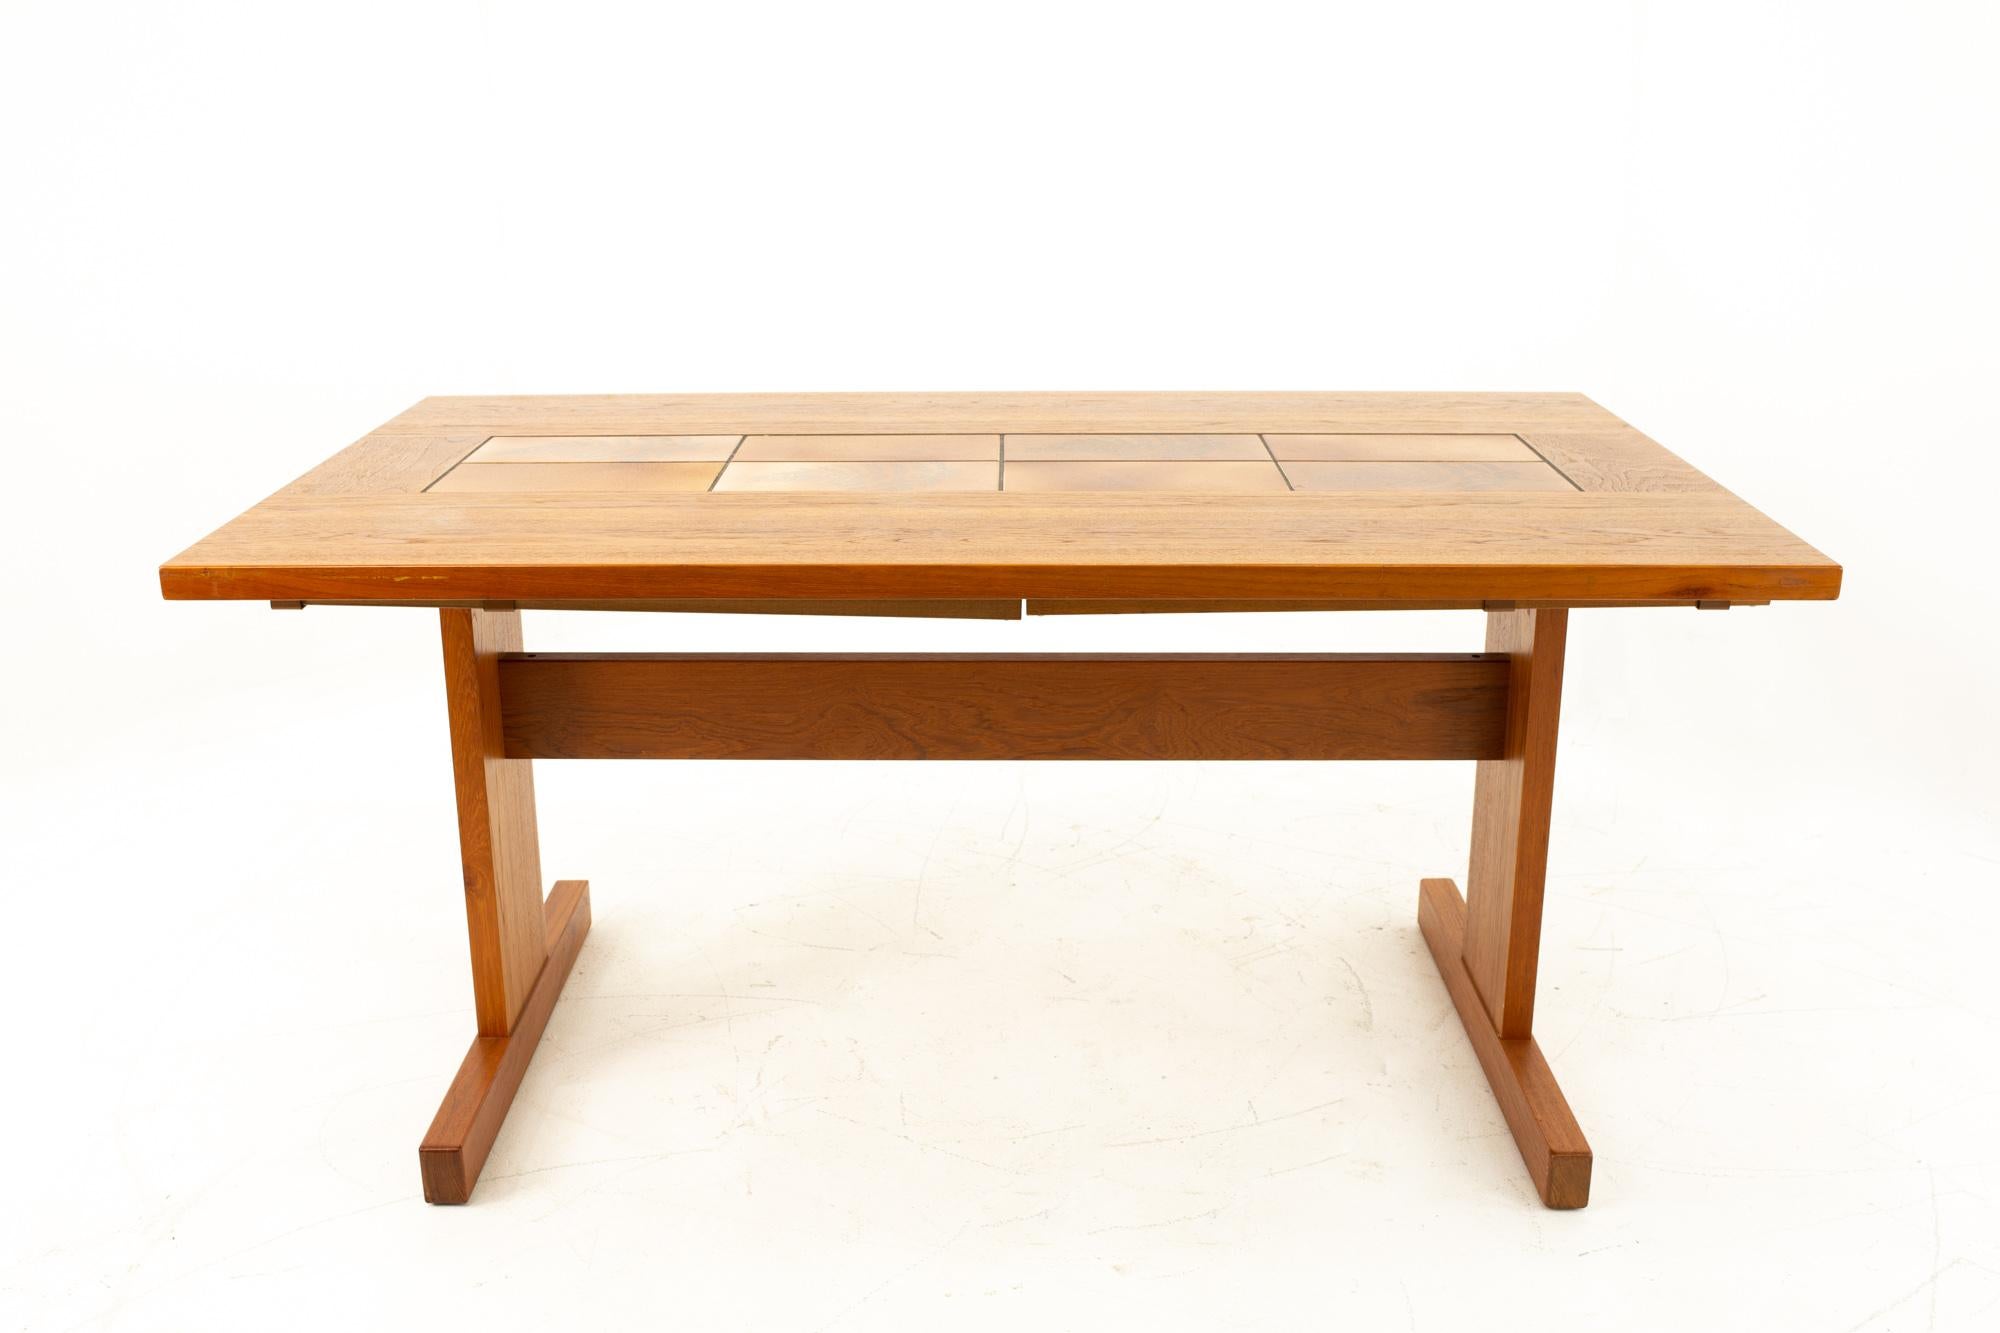 Mid-Century Modern teak dining table with tile inlay

Table without leaves measures: 60 wide x 35.5 deep x 29 high; Table with leaves measures: 90 wide 

This piece is available in what we call Restored Vintage Condition. Upon purchase it is